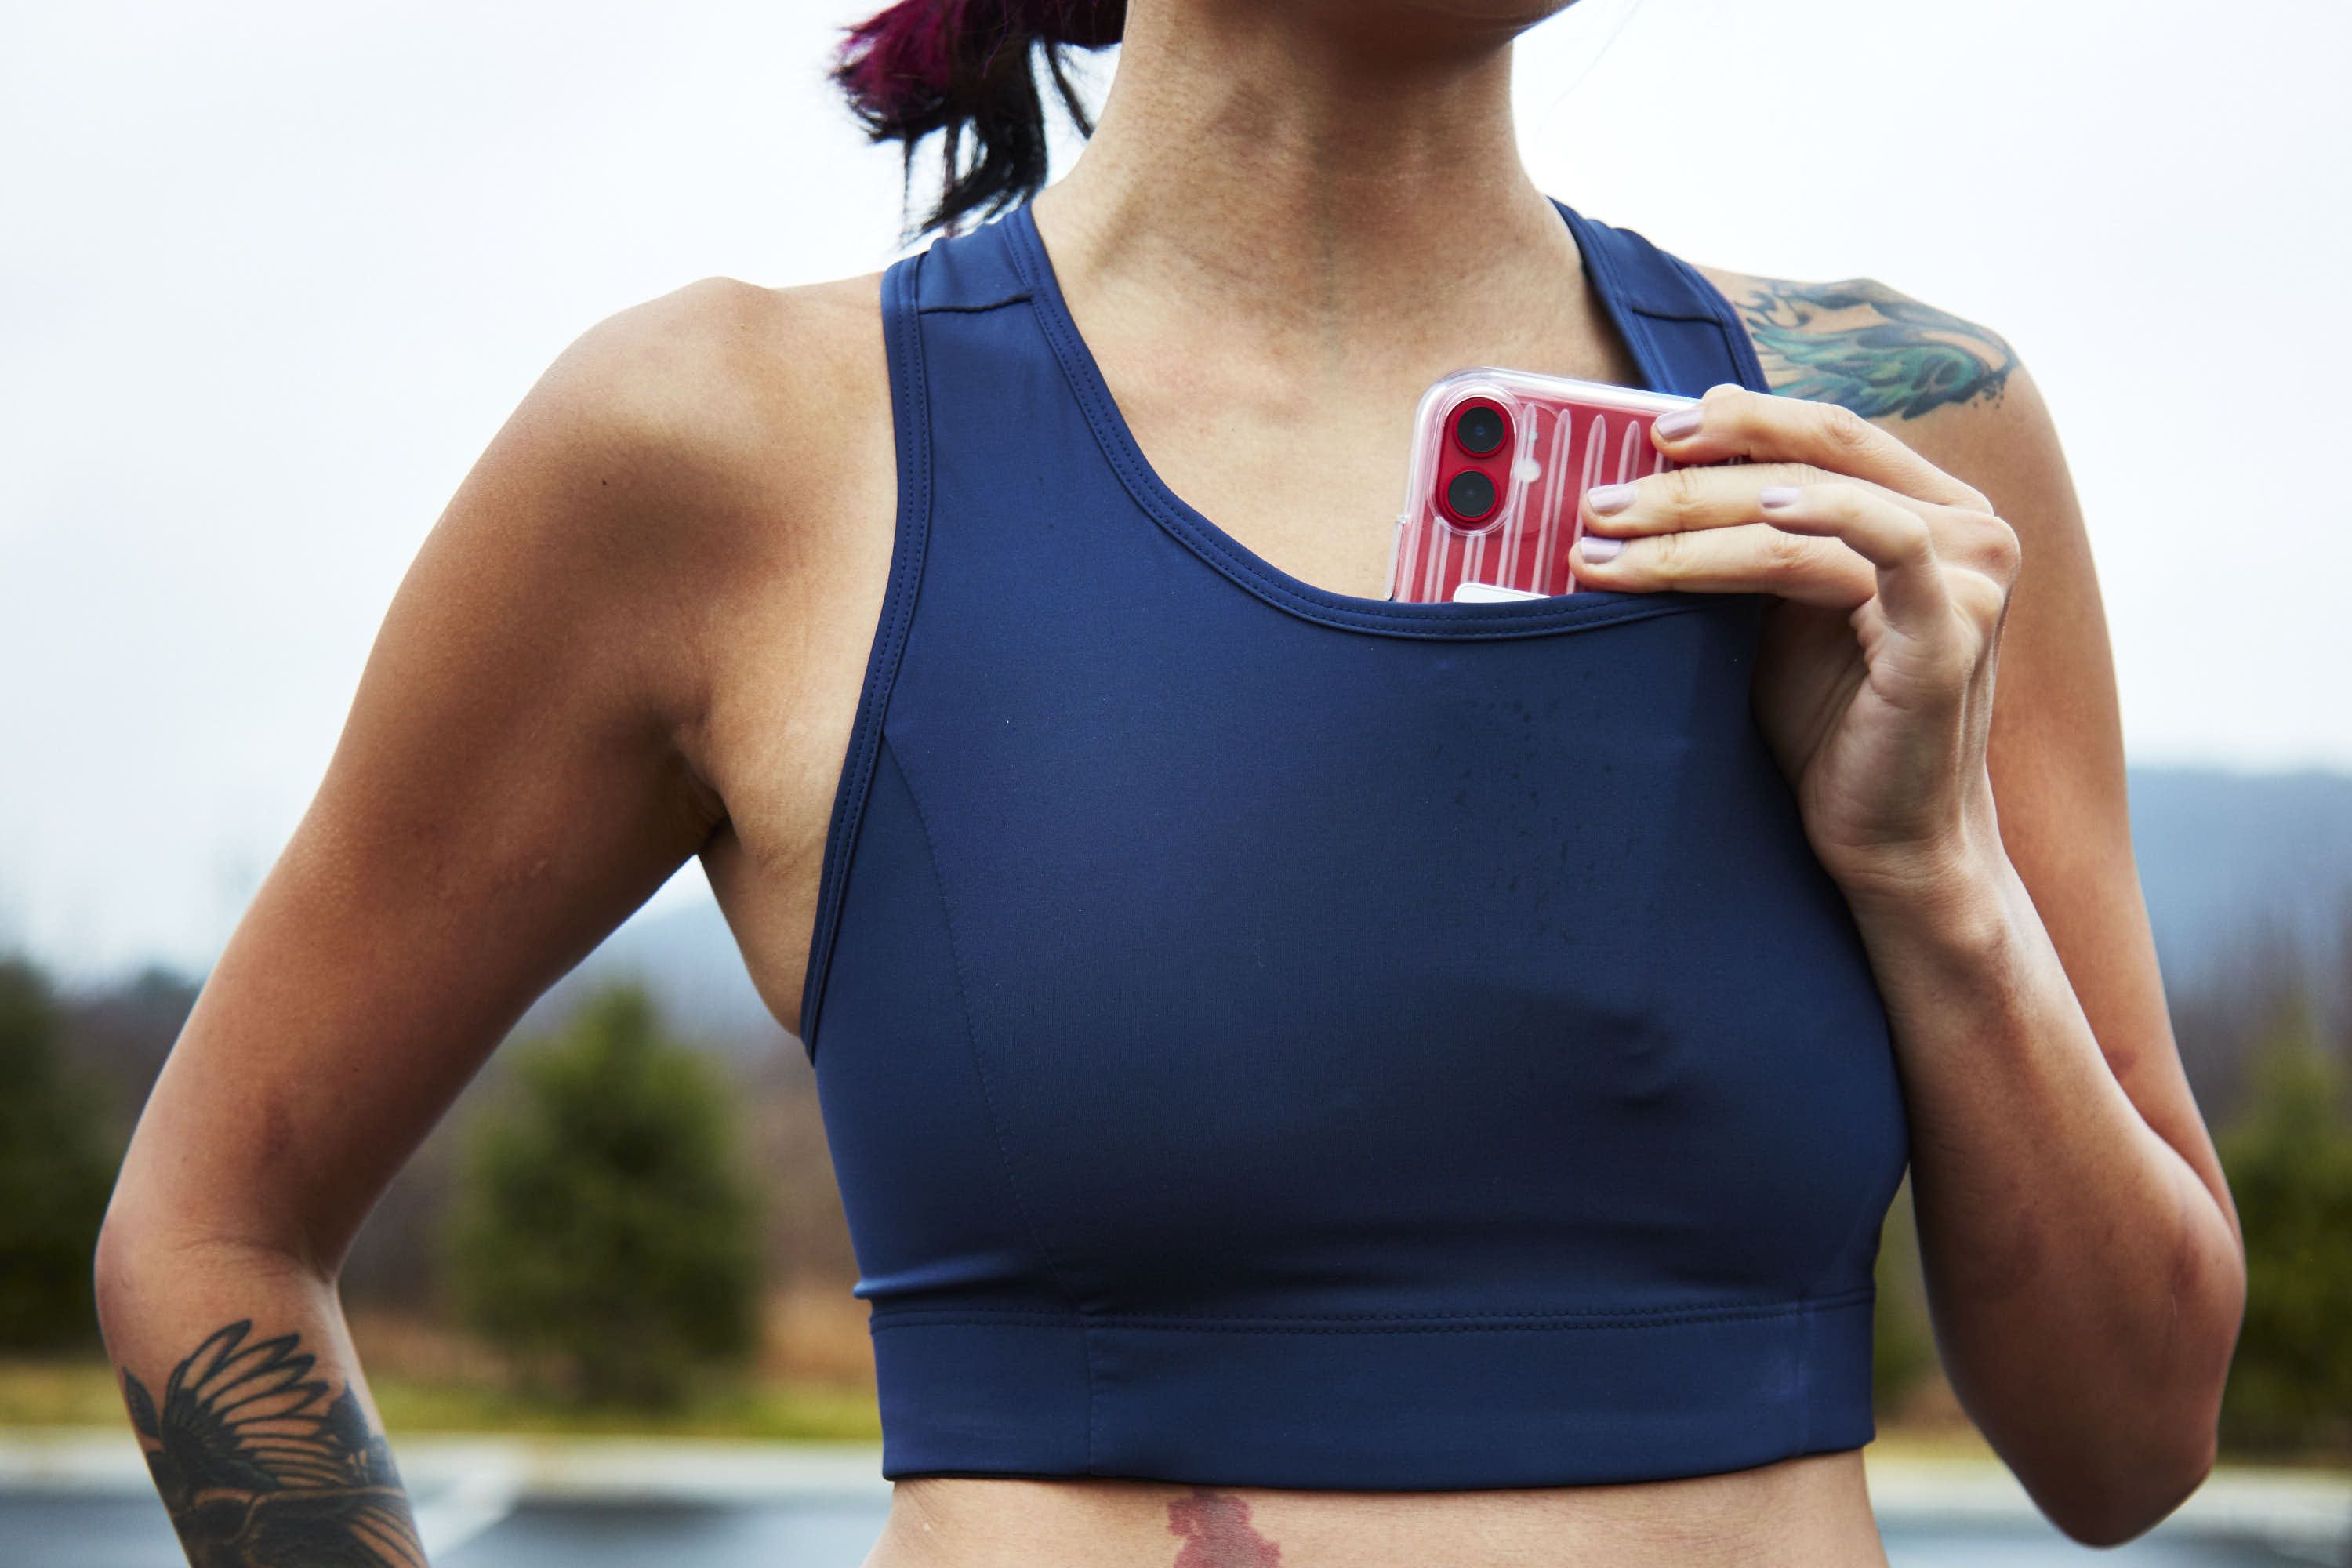 High levels of a toxic chemical discovered in sports bras